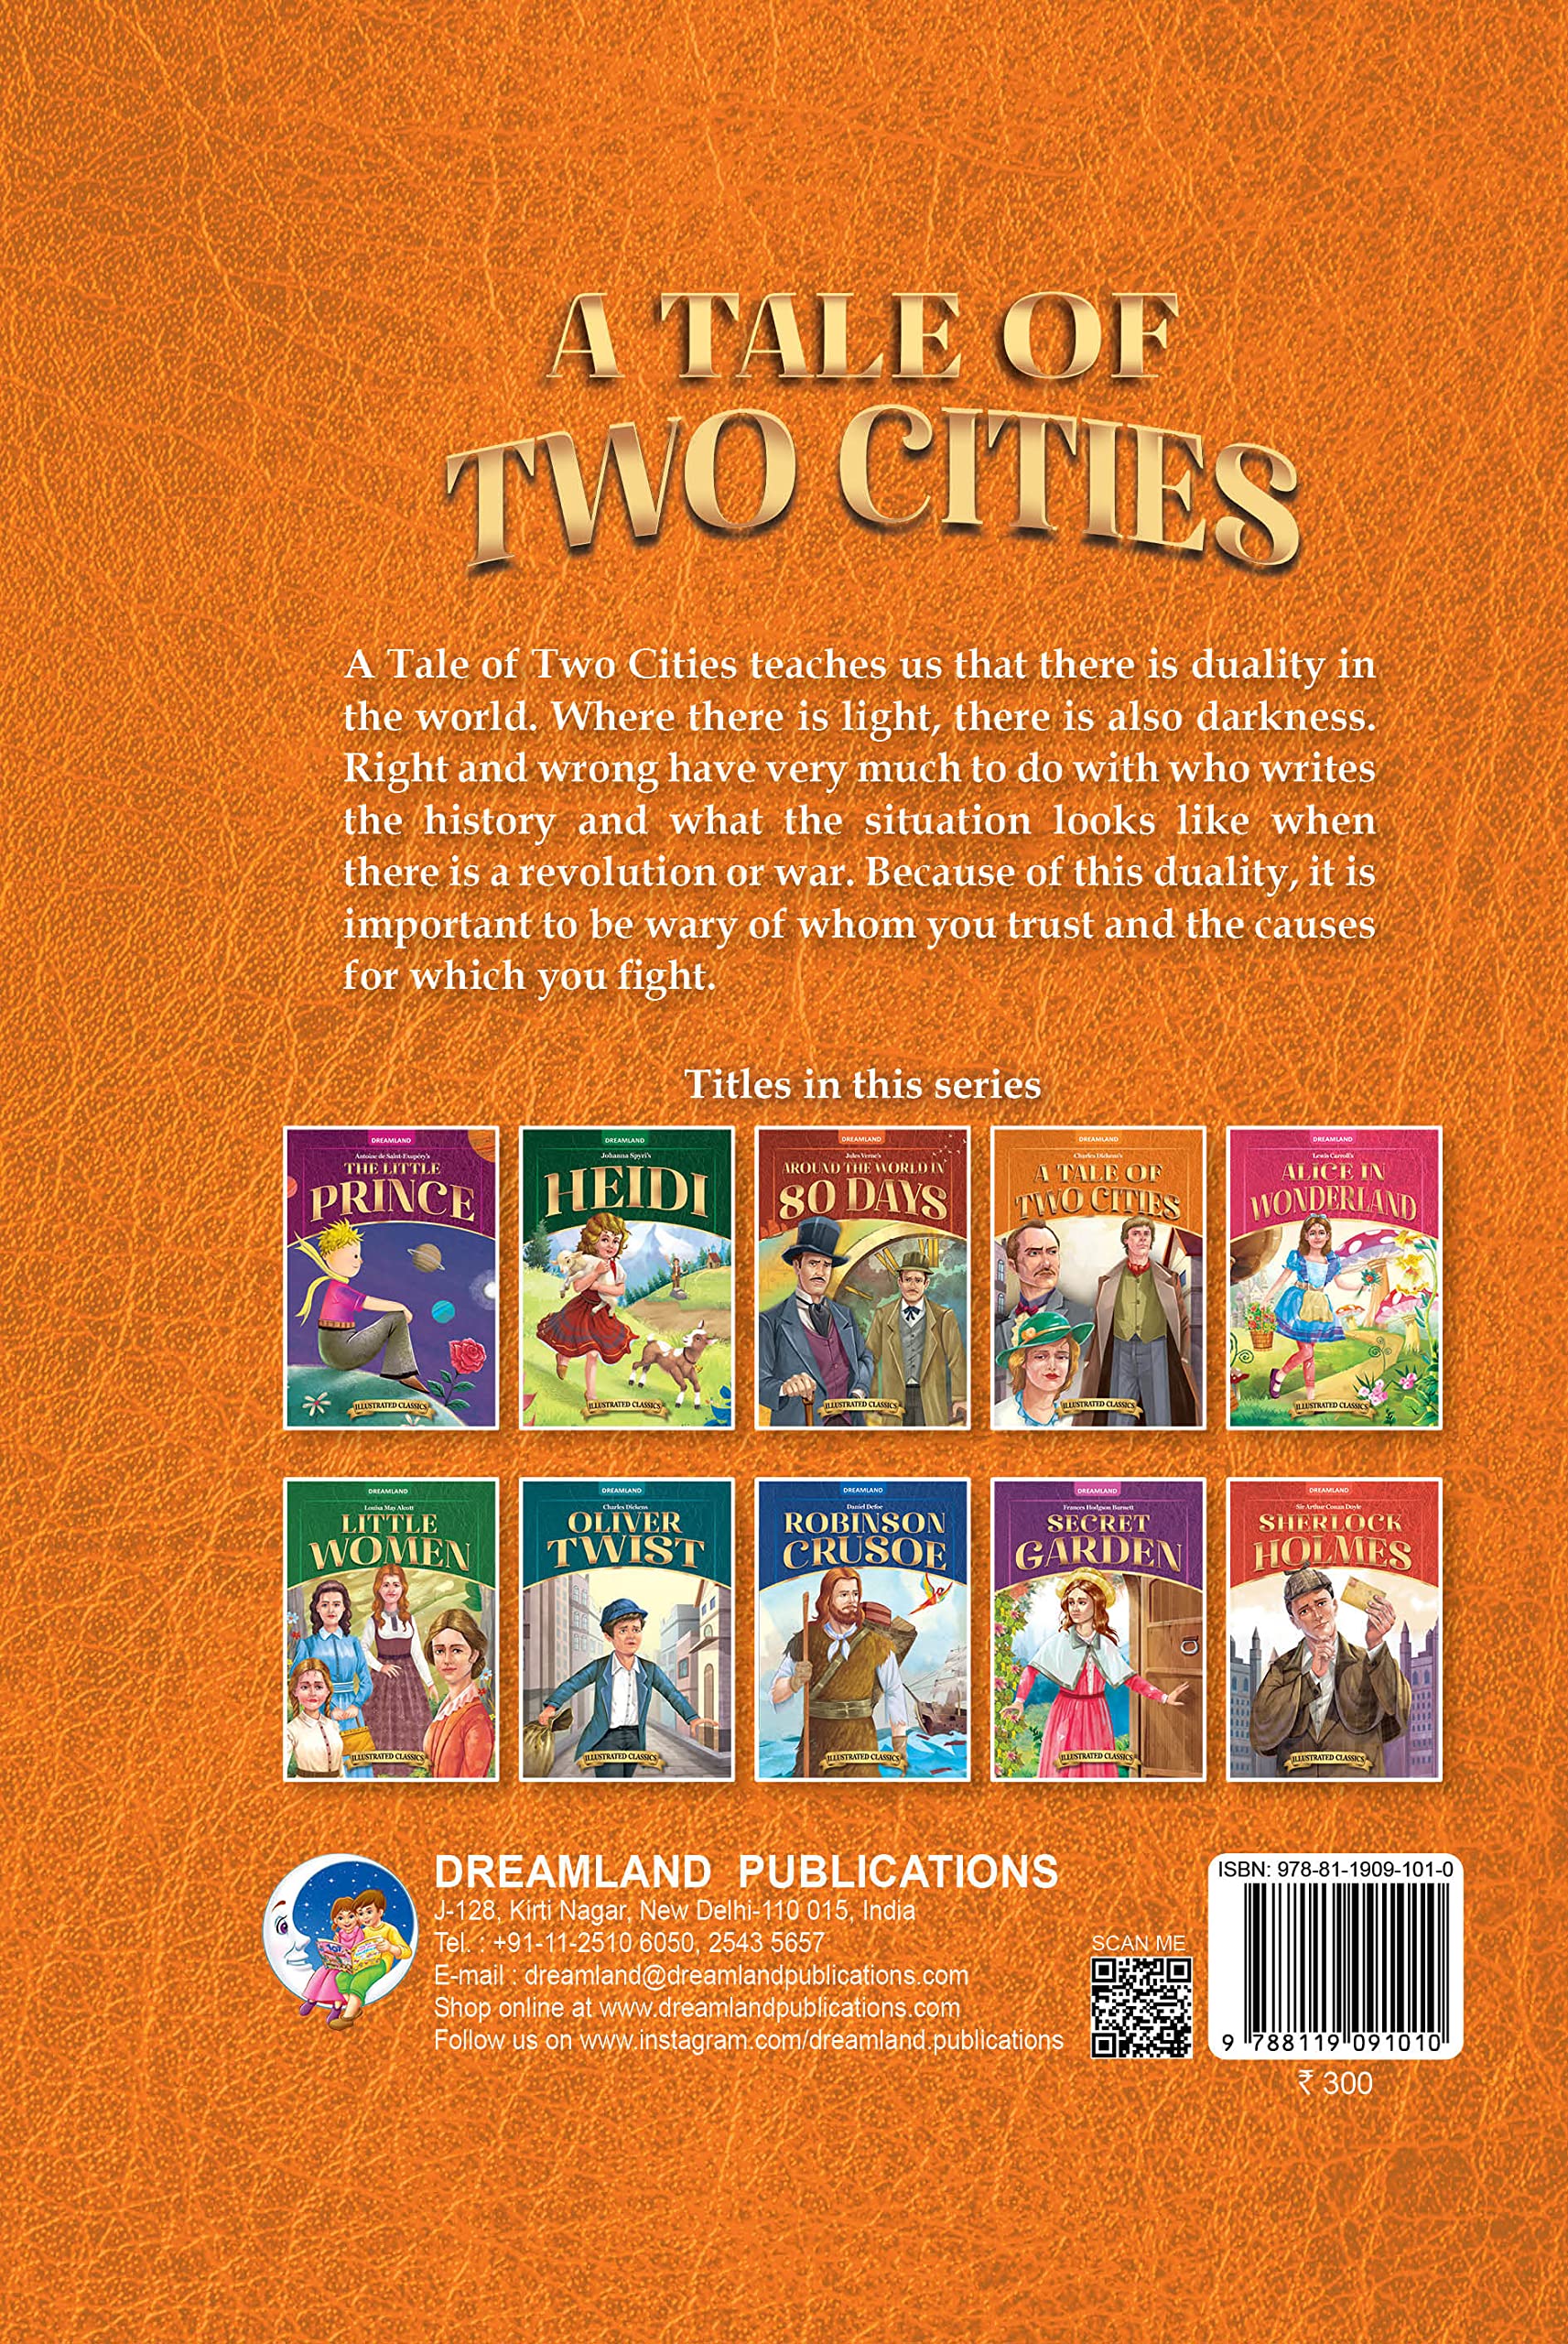 Dreamland Classic Tales A Tale of Two Cities - llustrated Abridged Classics for Children with Practice Questions